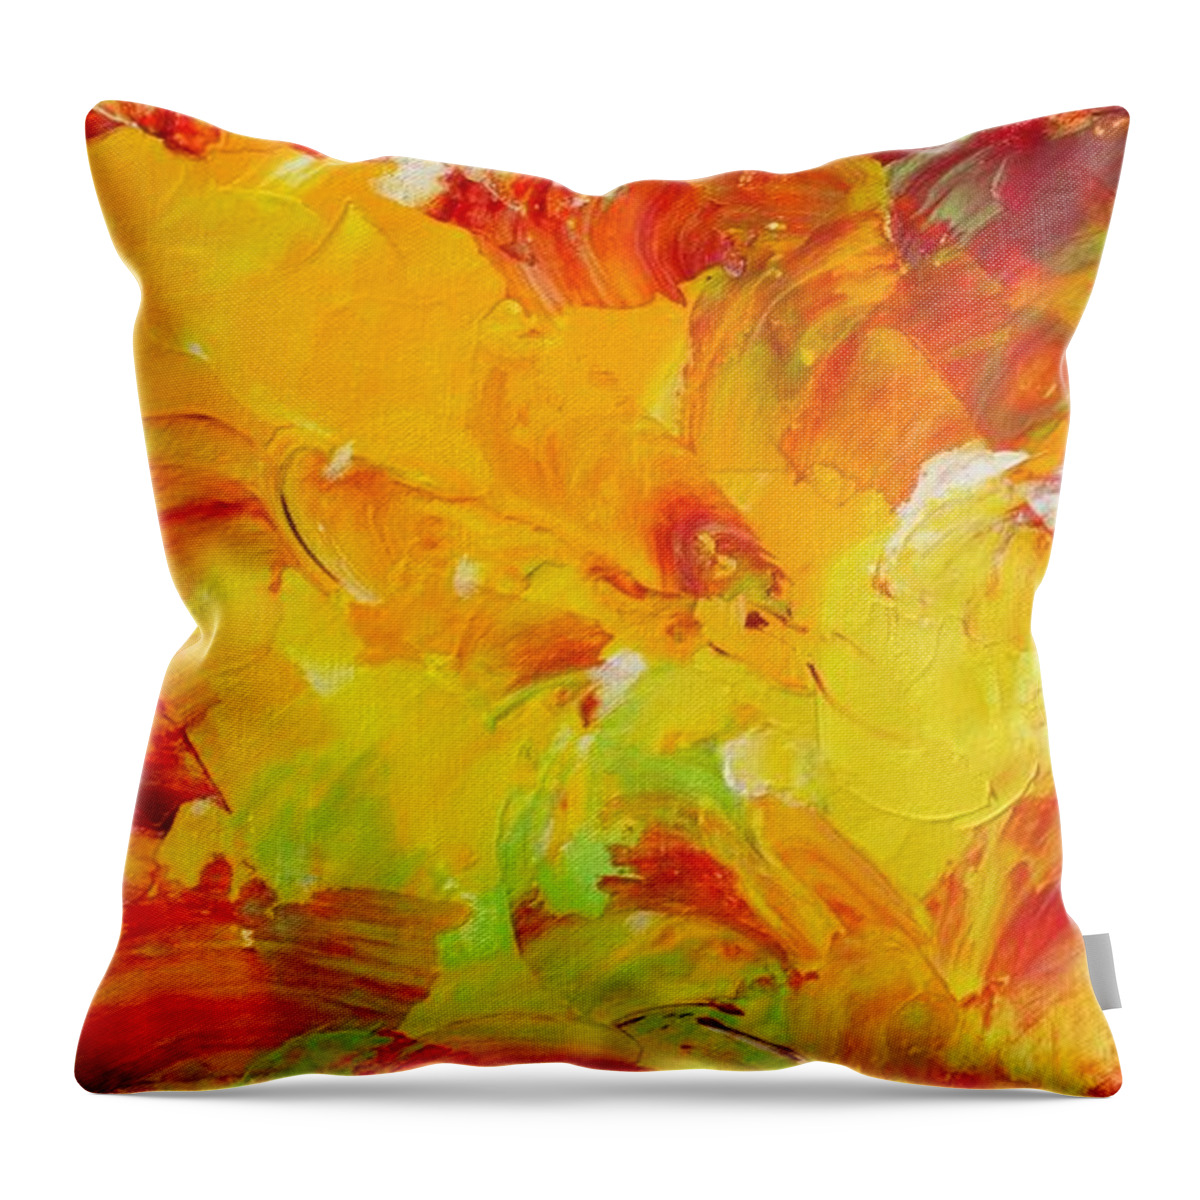 Abstract Throw Pillow featuring the painting Hibiscus by Claire Gagnon